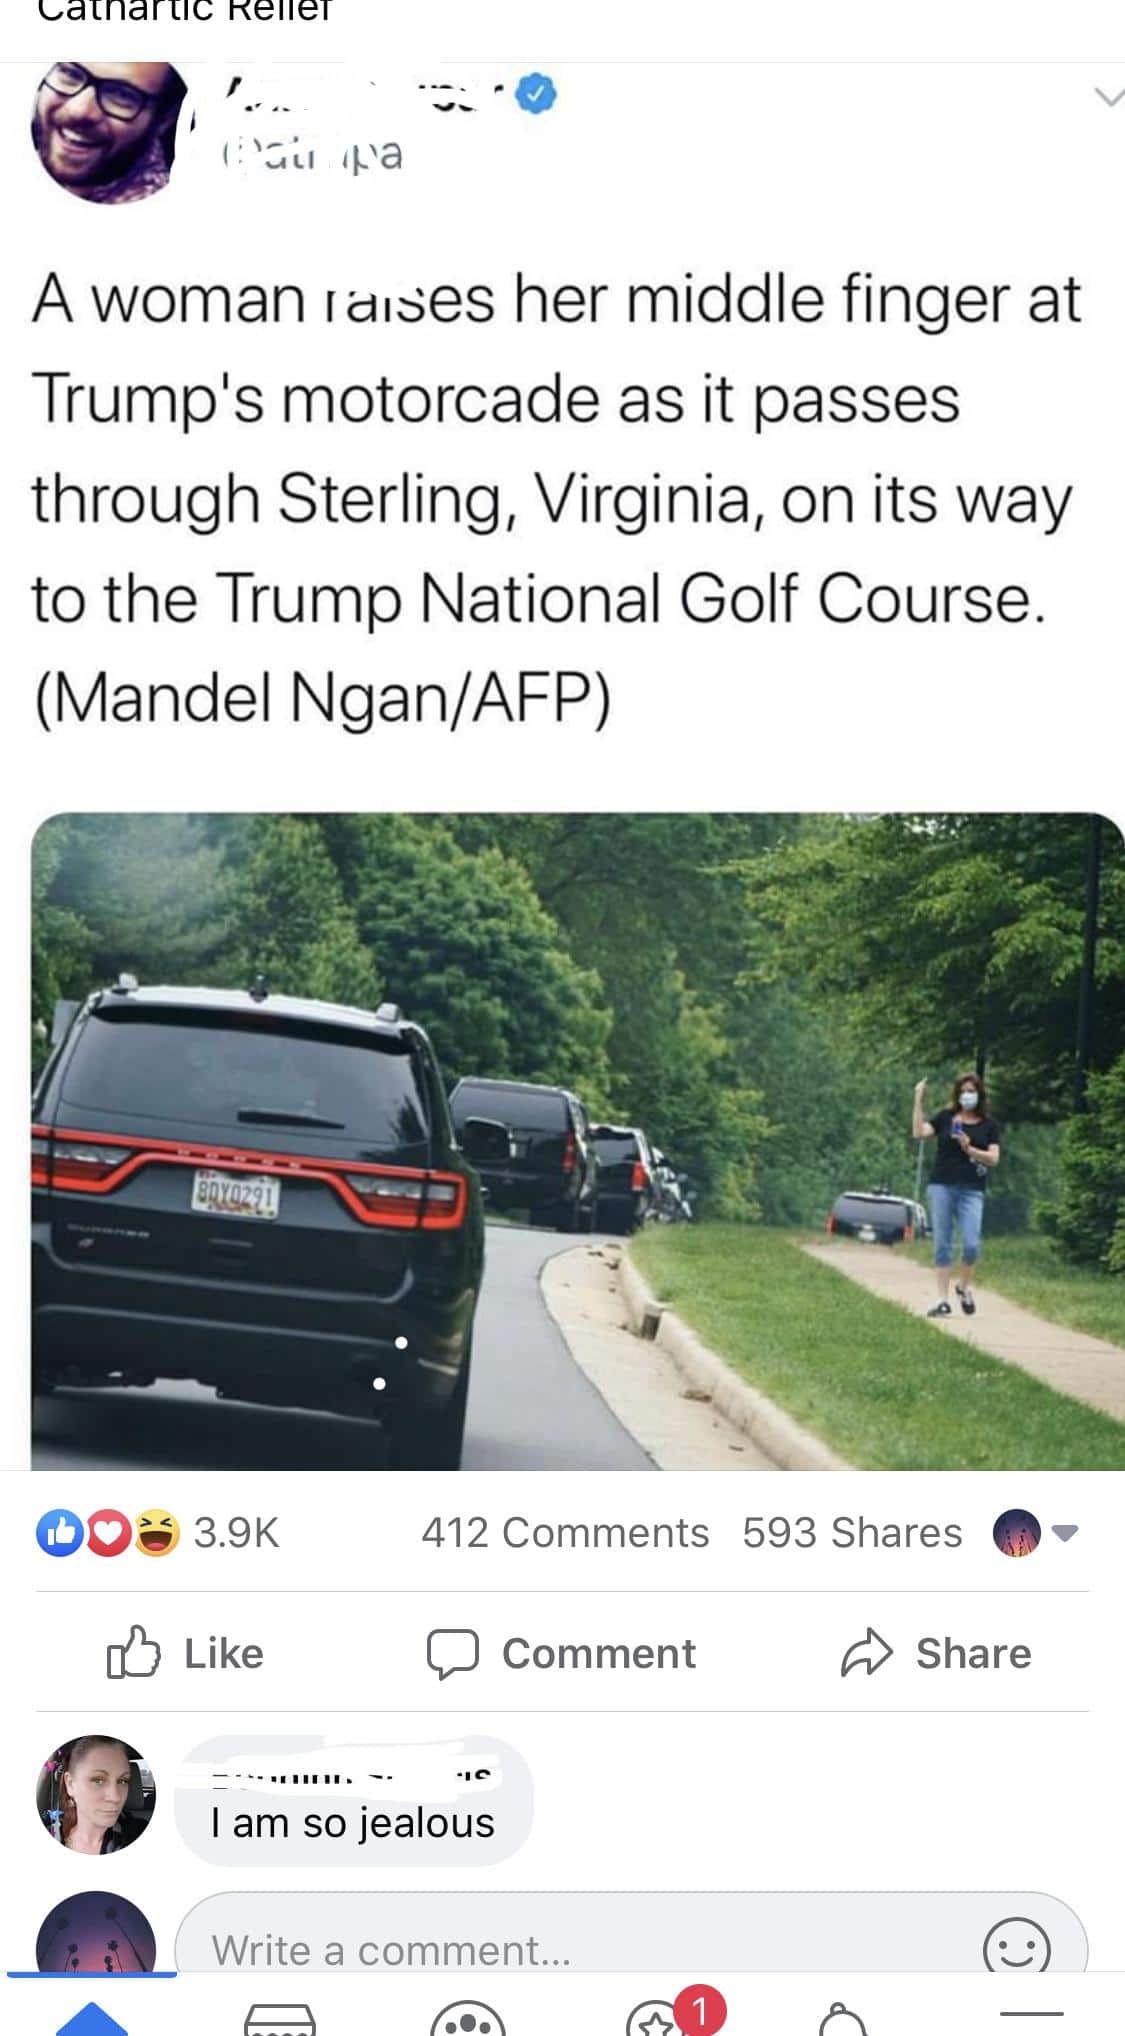 Political, Trump, IRVA, Vid, Em7, Virginia Political Memes Political, Trump, IRVA, Vid, Em7, Virginia text: A woman Idlses her middle finger at Trump's motorcade as it passes through Sterling, Virginia, on its way to the Trump National Golf Course. (Mandel Ngan/AFP) 3.9K [D Like 412 Comments 593 Shares C) Comment Share I am so jealous Write a comment... 